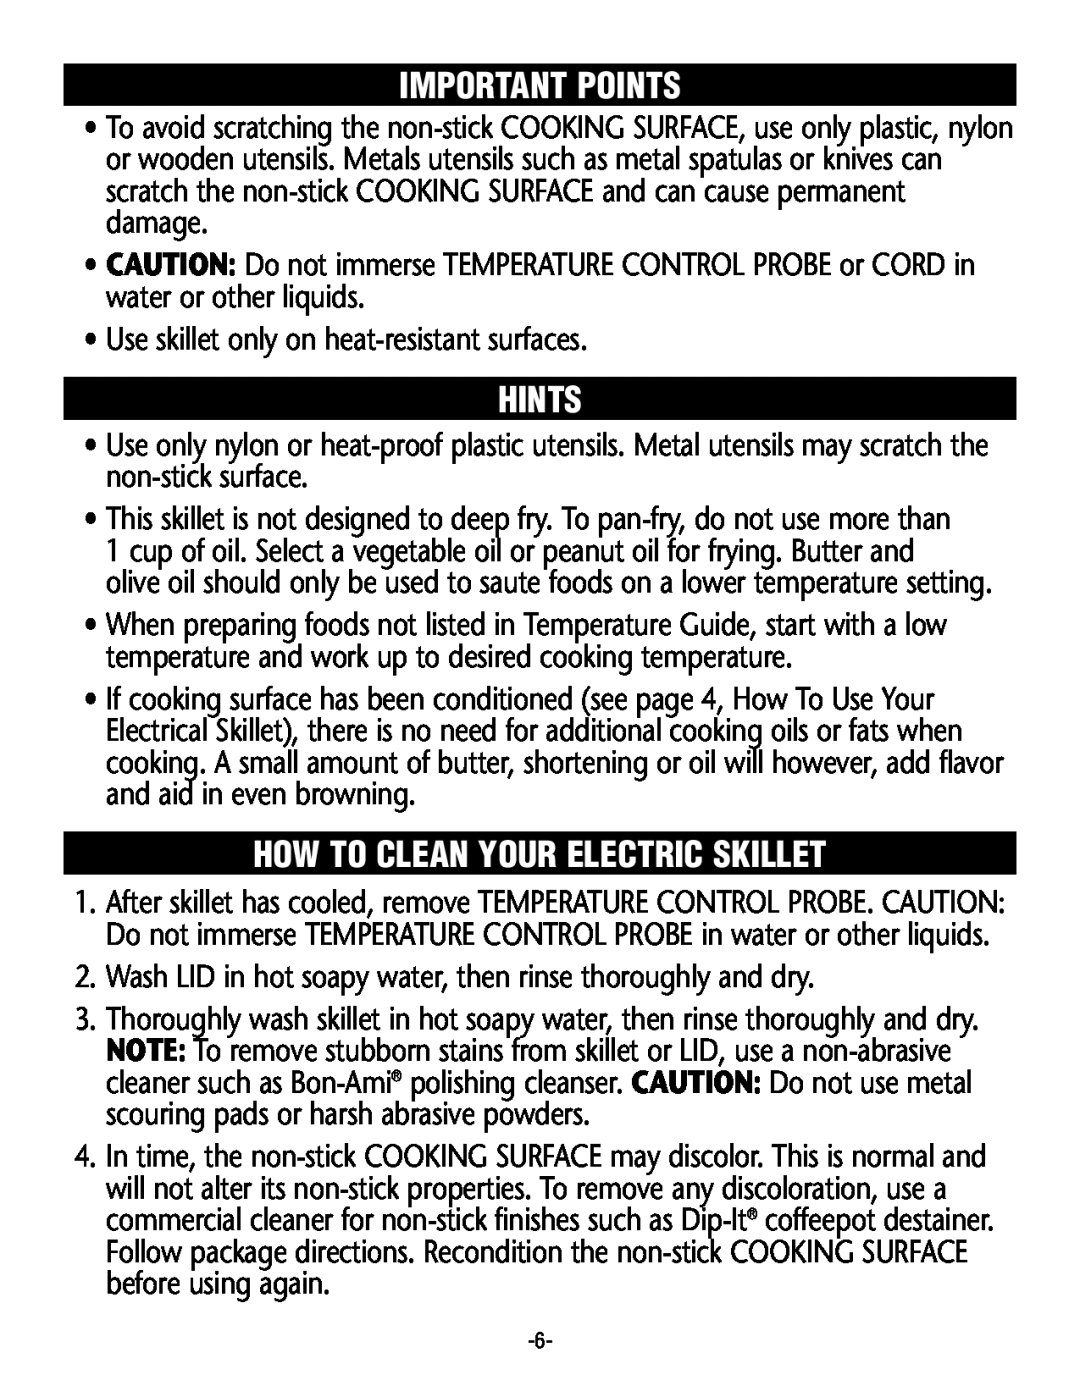 Rival S12 G manual Important Points, Hints, How To Clean Your Electric Skillet 